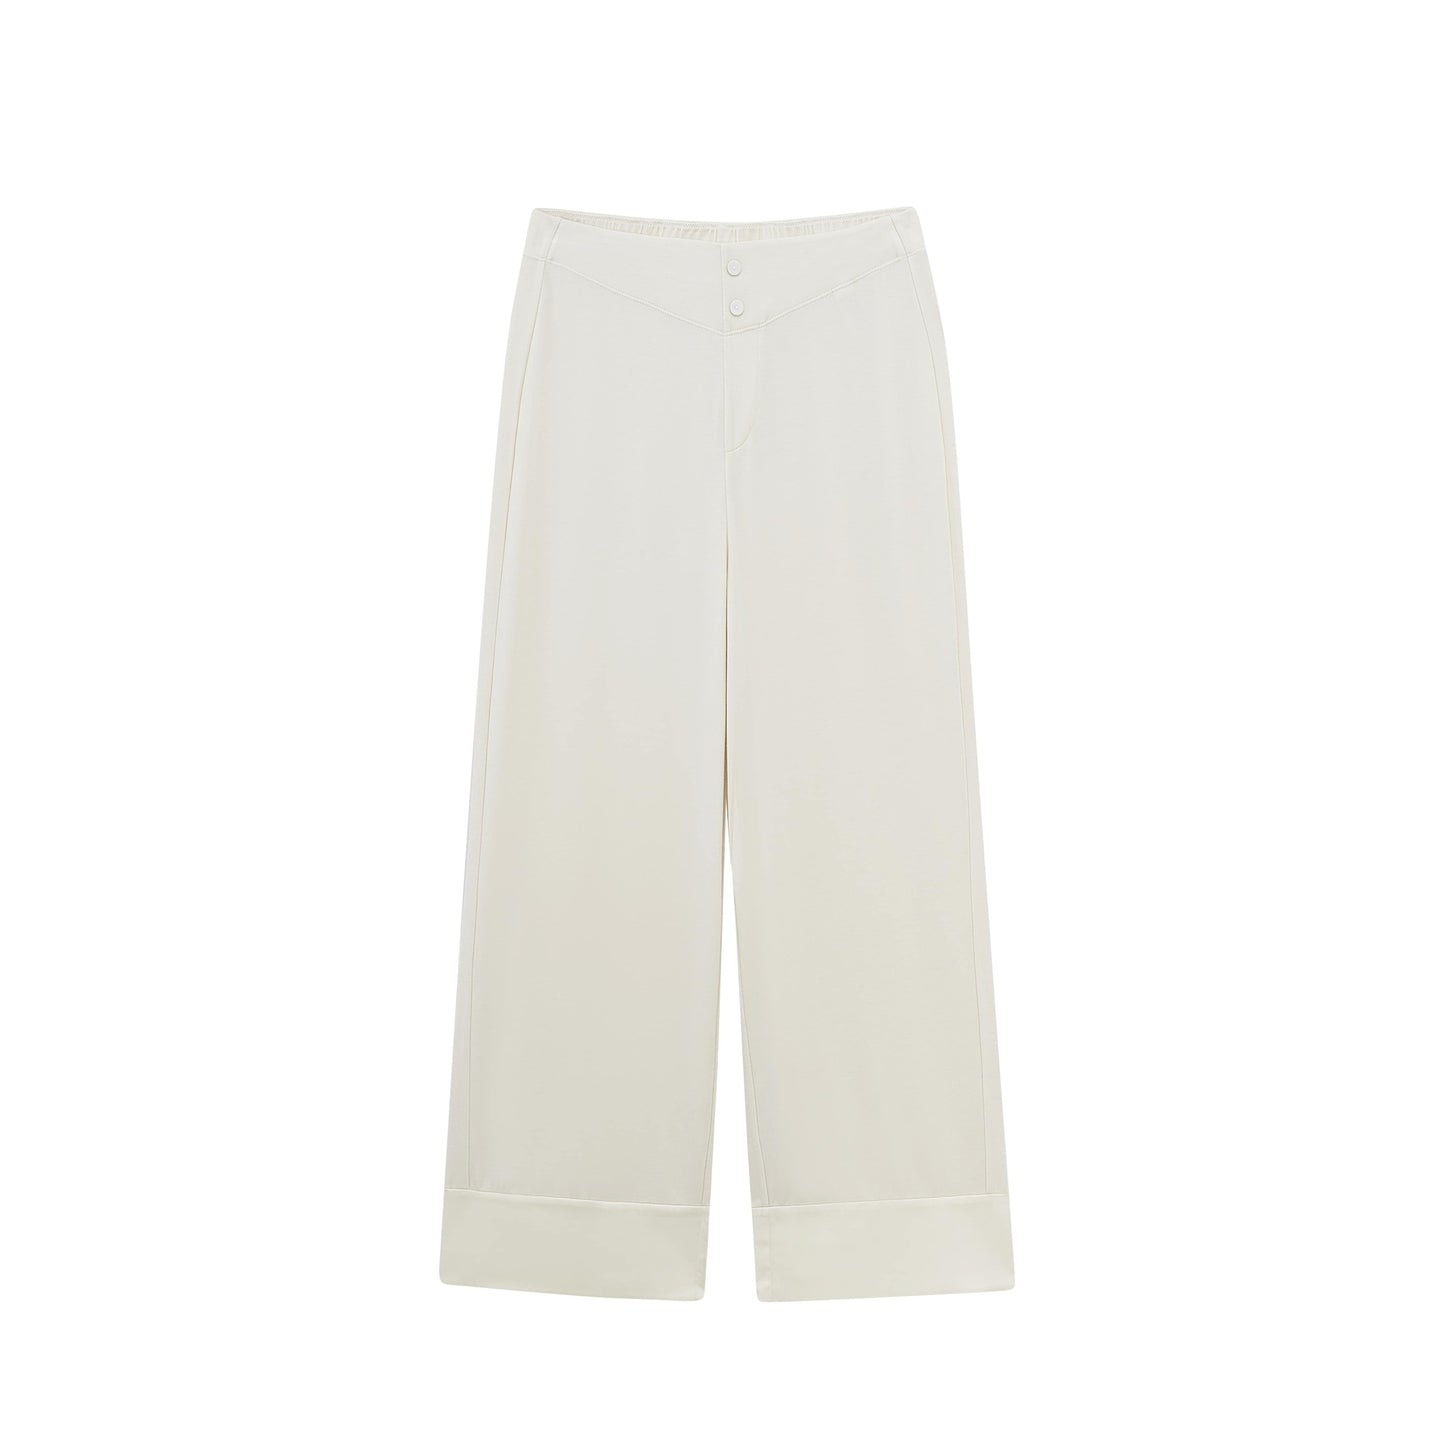 Flat lay image of off-white pajama pant with two decorative buttons at waist band